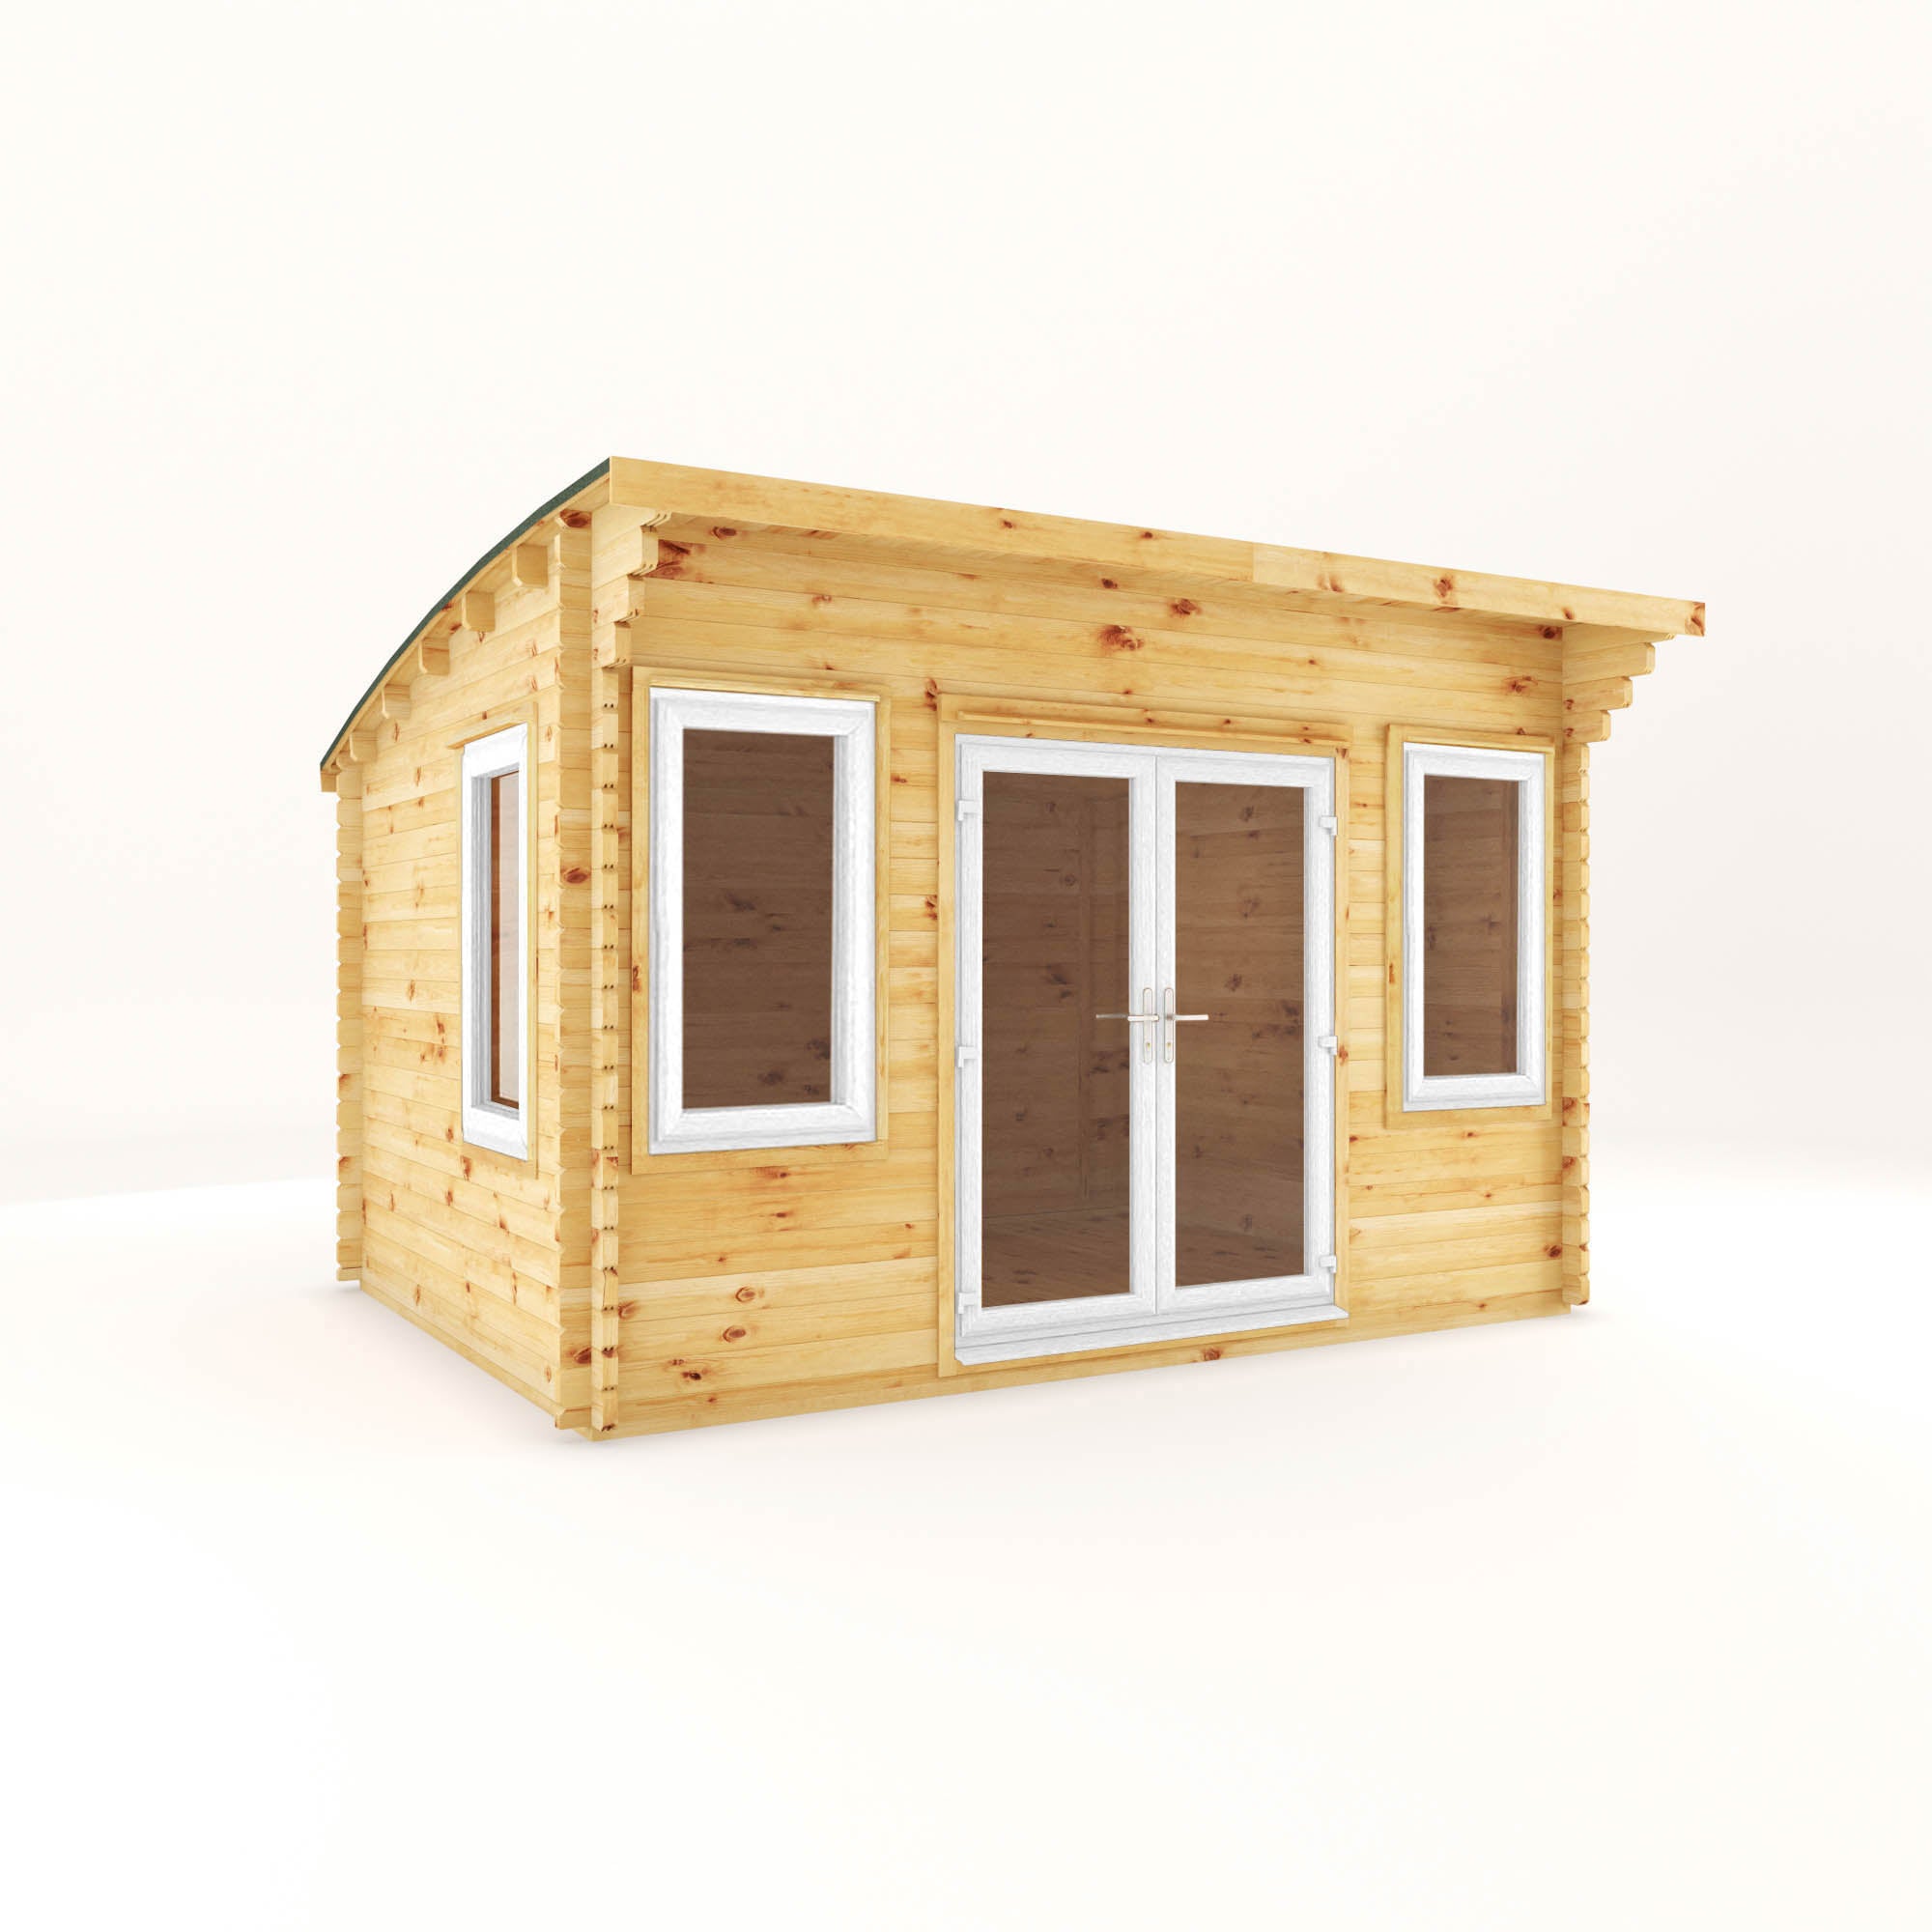 4m x 3m Curved Roof Helios Log Cabin - UPVC White